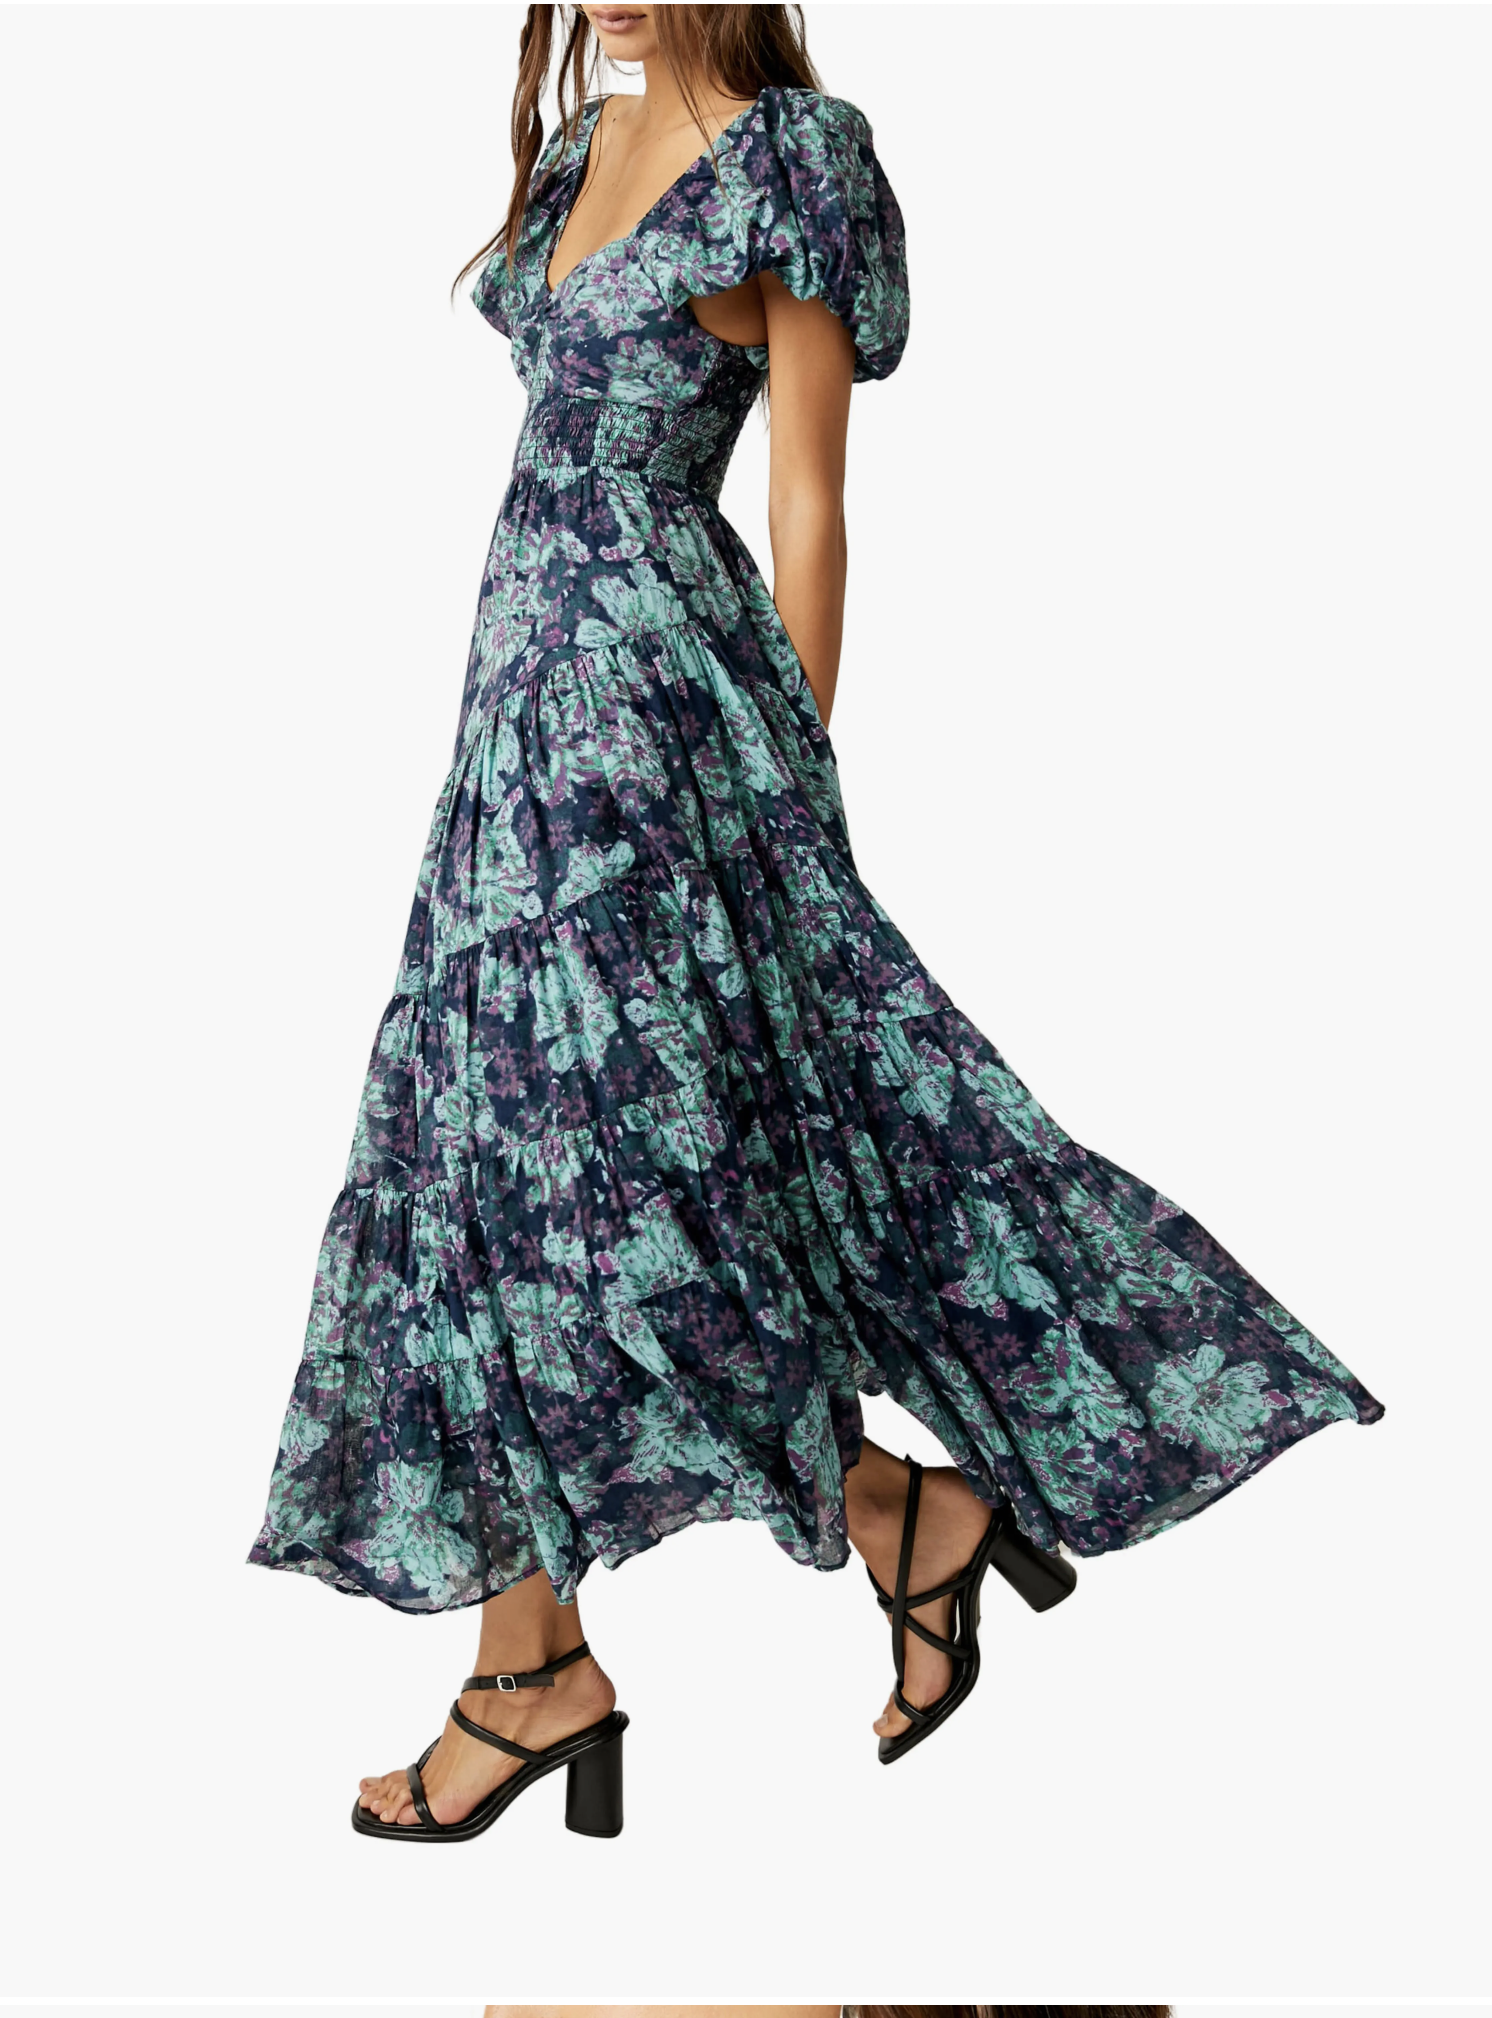 Let's explore the essence of summer with our guide to the best floral summer dresses for every occasion. Embrace comfort, style, and versatility with these must-have blooms. Floral Summer Dress | Floral Summer Dresses | Summer Dress | Spring Dress | Formal Dress | Dress Outfit | Maxi Dress | Summer Top | Sundress | Cute Dress | Floral Dress | Beach Dress | Sun Dress | Midi Dress | Flower Dress | Spring Fling Dress